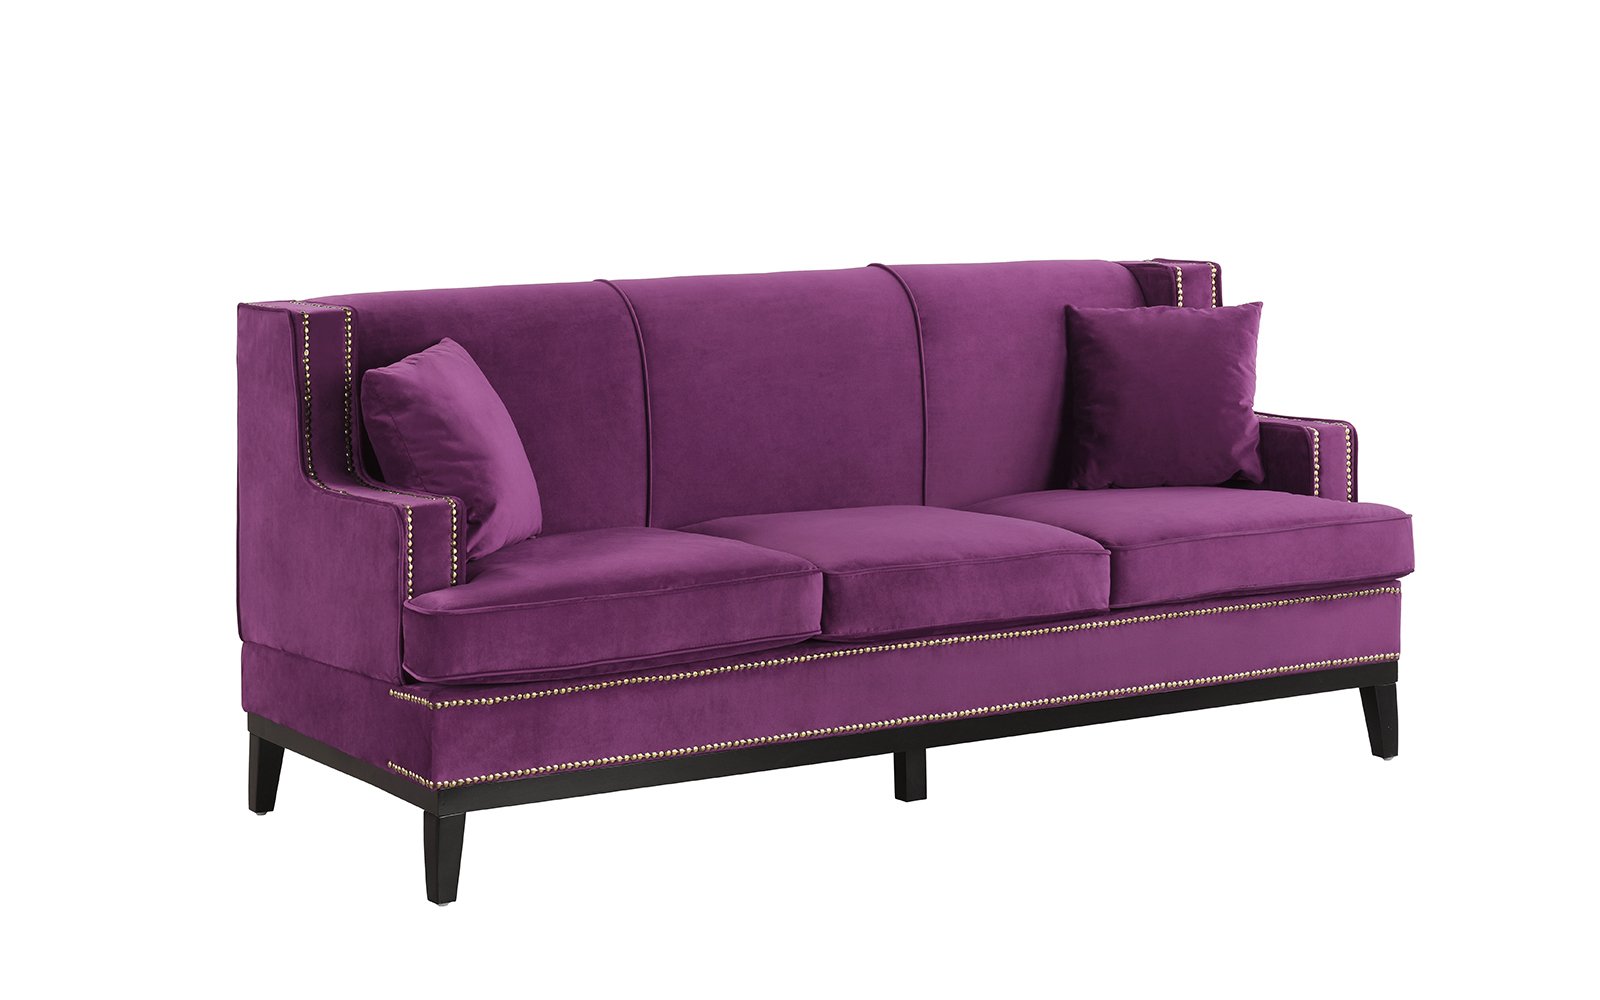 Modern Vintage Style Soft Velvet Sofa, Couch with Nailhead Trim Detail